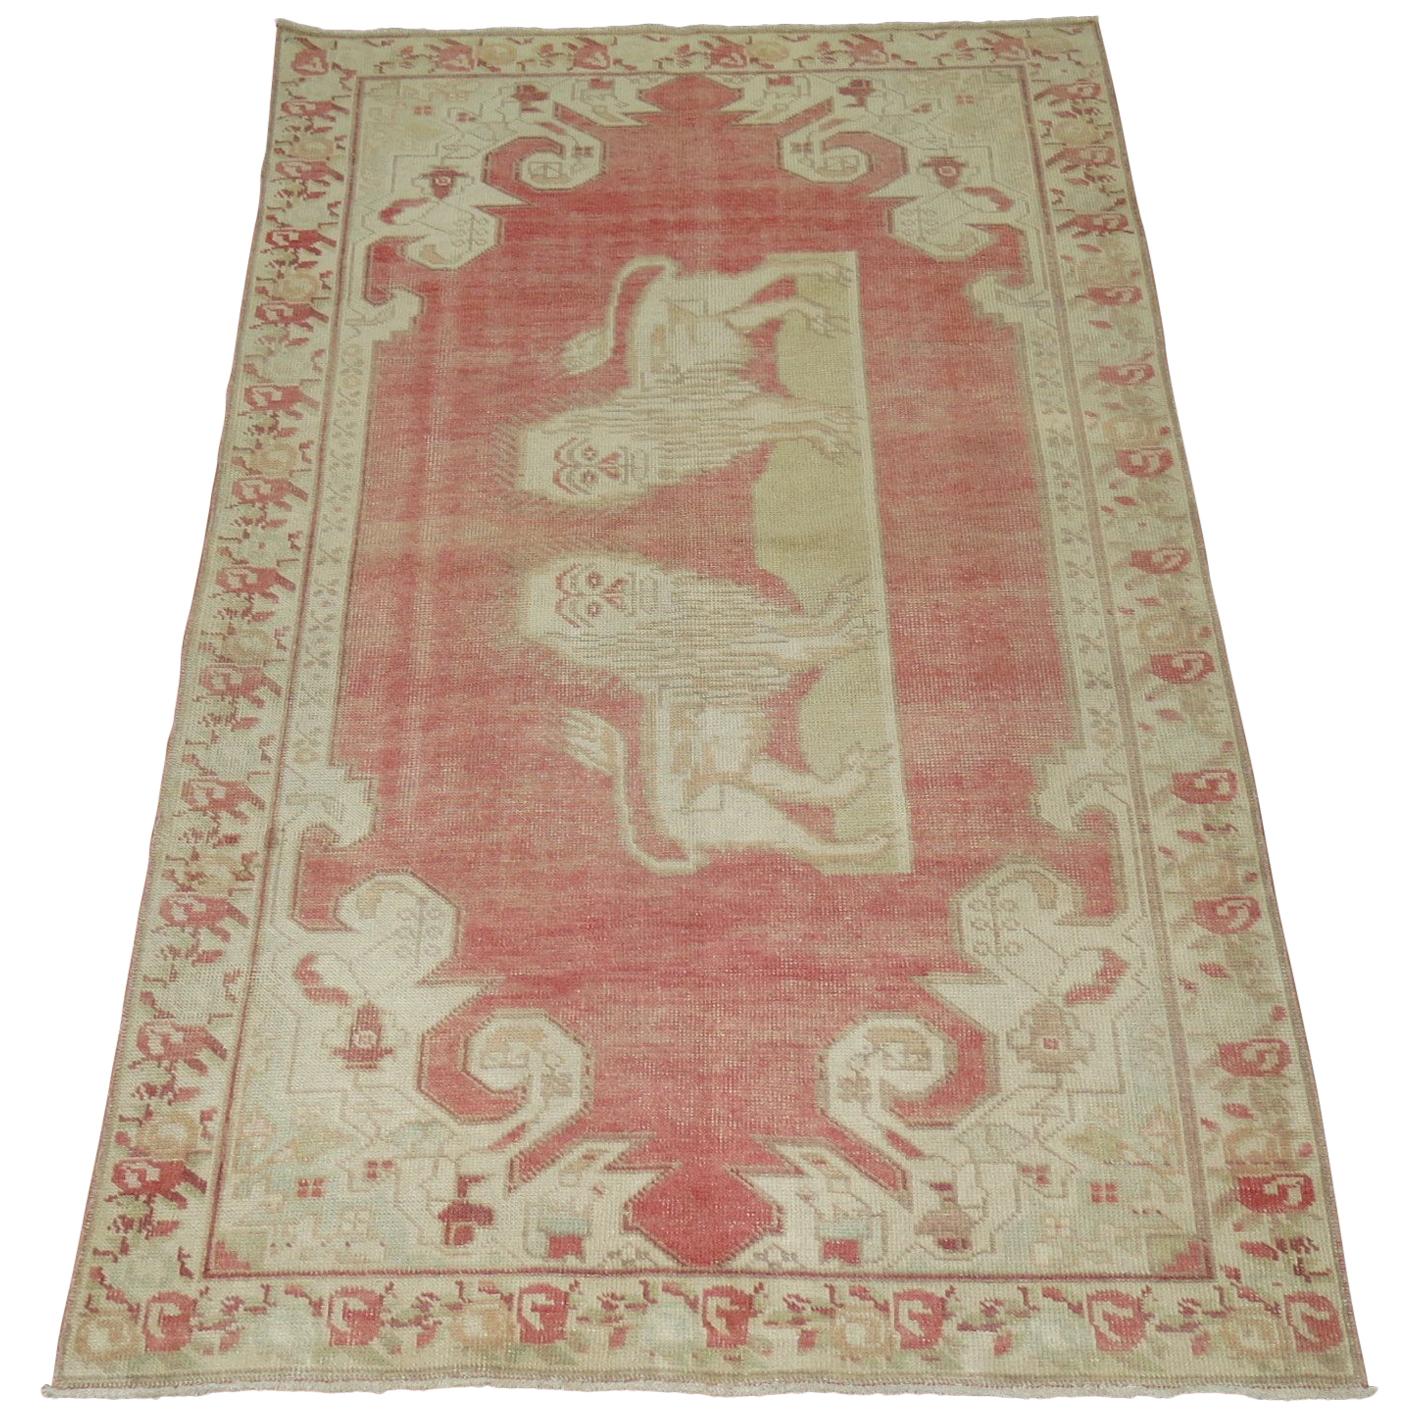 Pictorial Animal Vintage Turkish Anatolian rug in soft pink and cream accents.